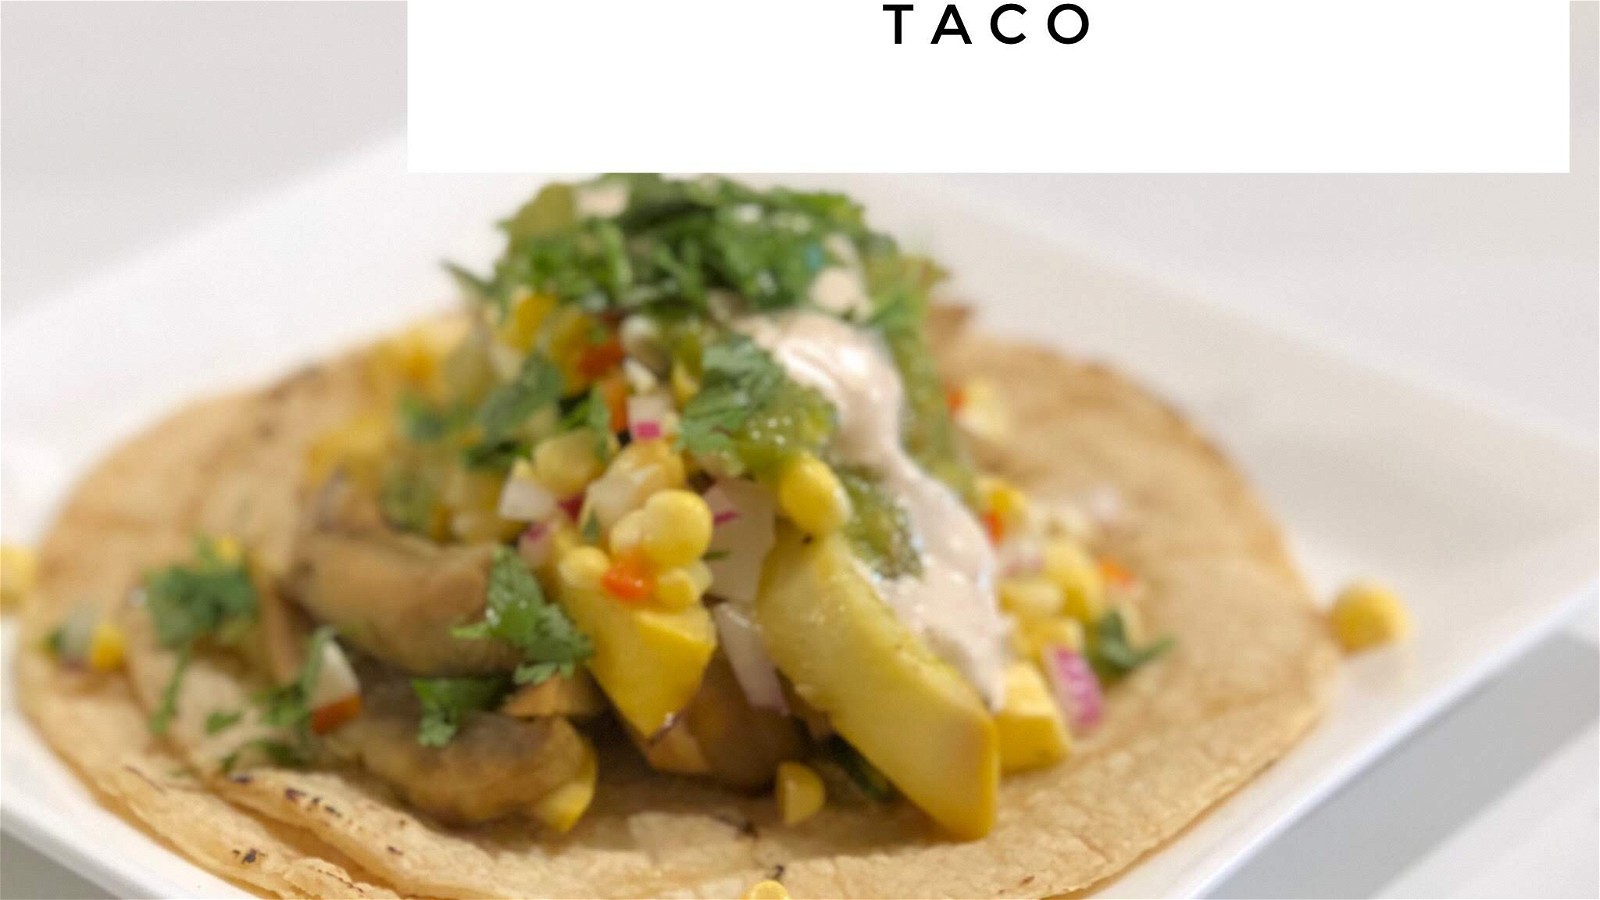 Image of Grilled Vegetable Tacos with Corn Salsa